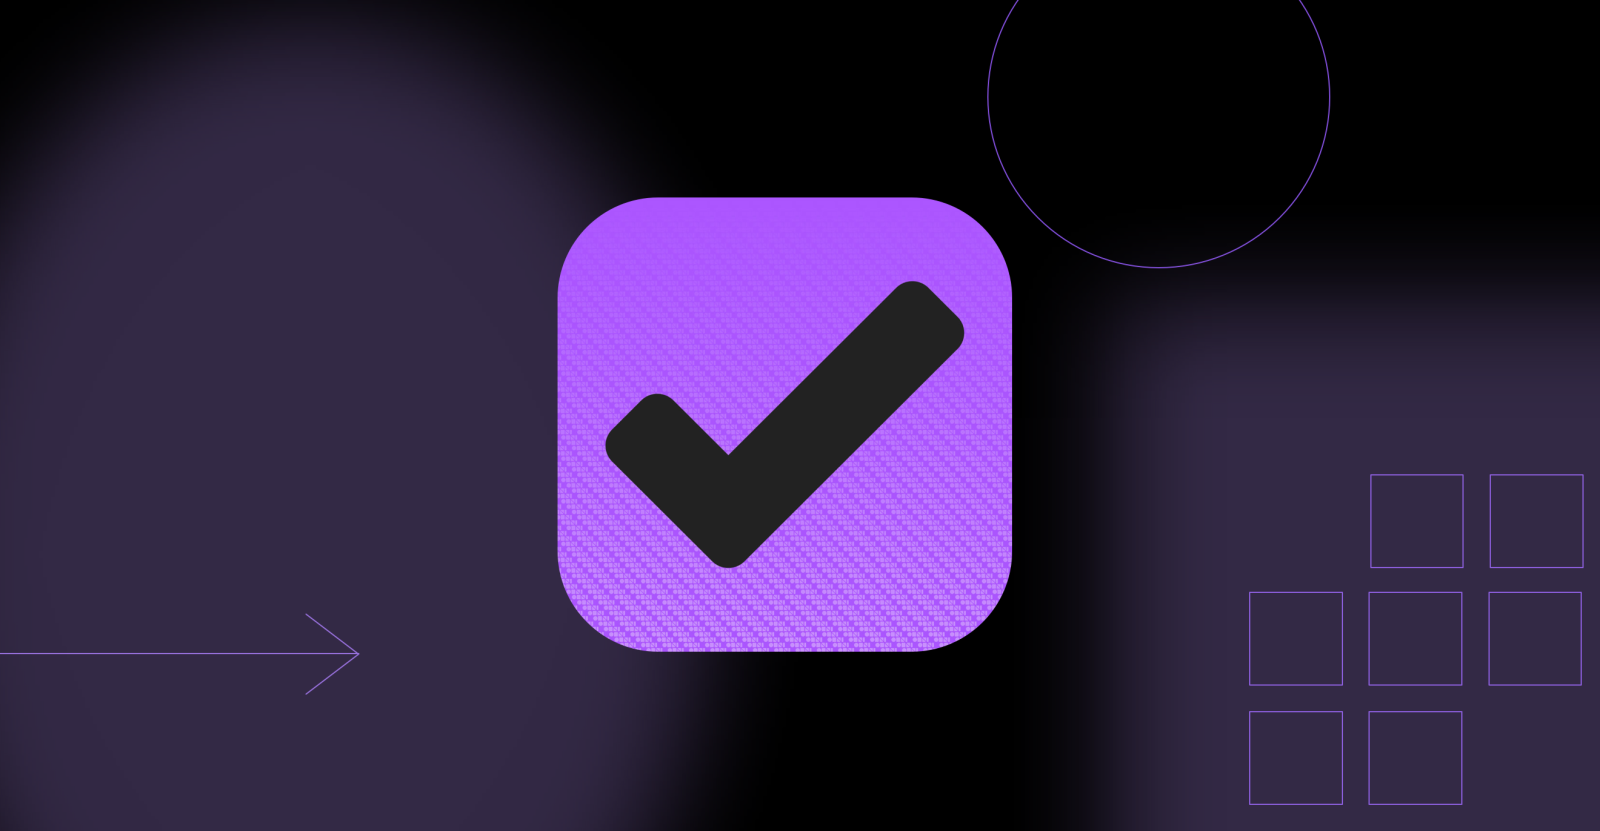 OmniFocus 3 update brings full Voice Control support on iOS and macOS